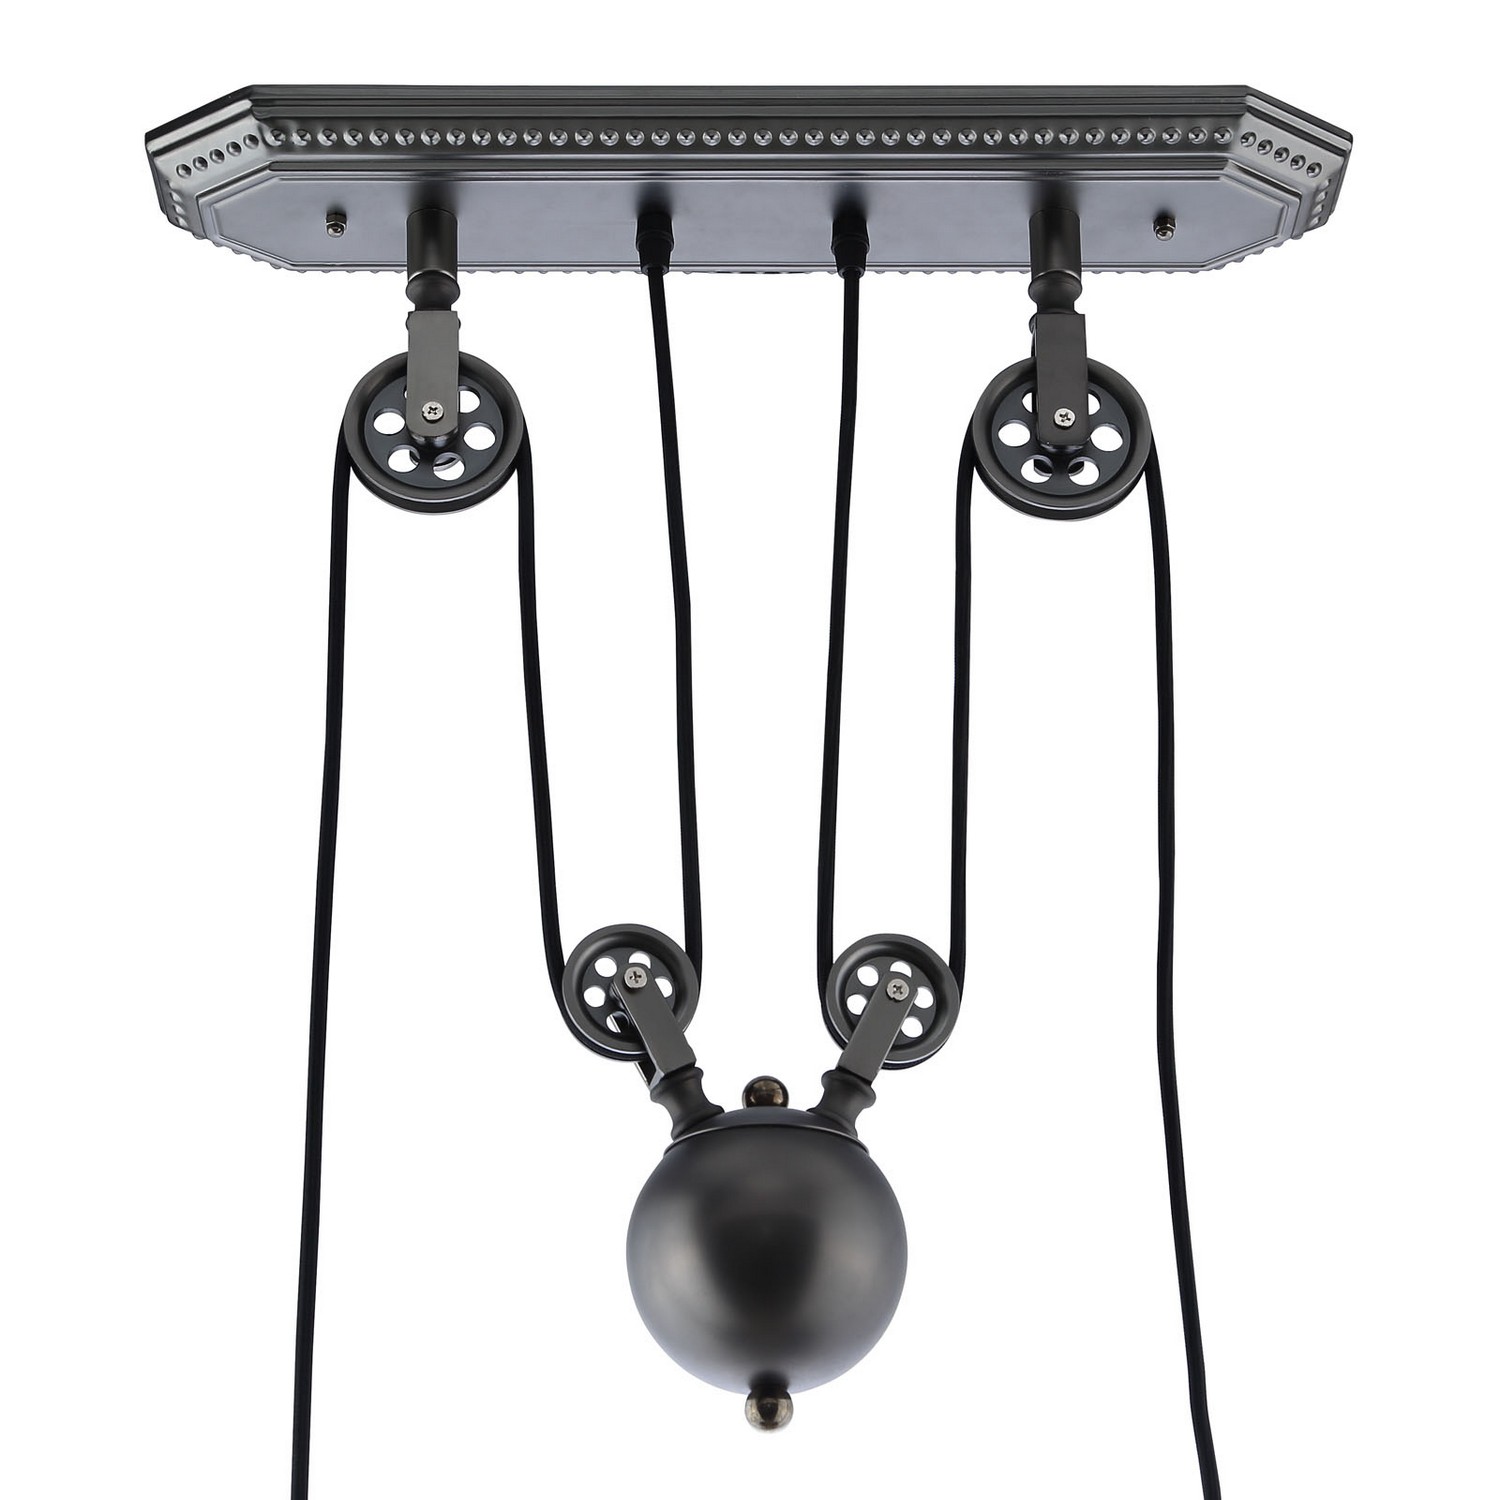 Modway Innovateous Ceiling Fixture - Silver